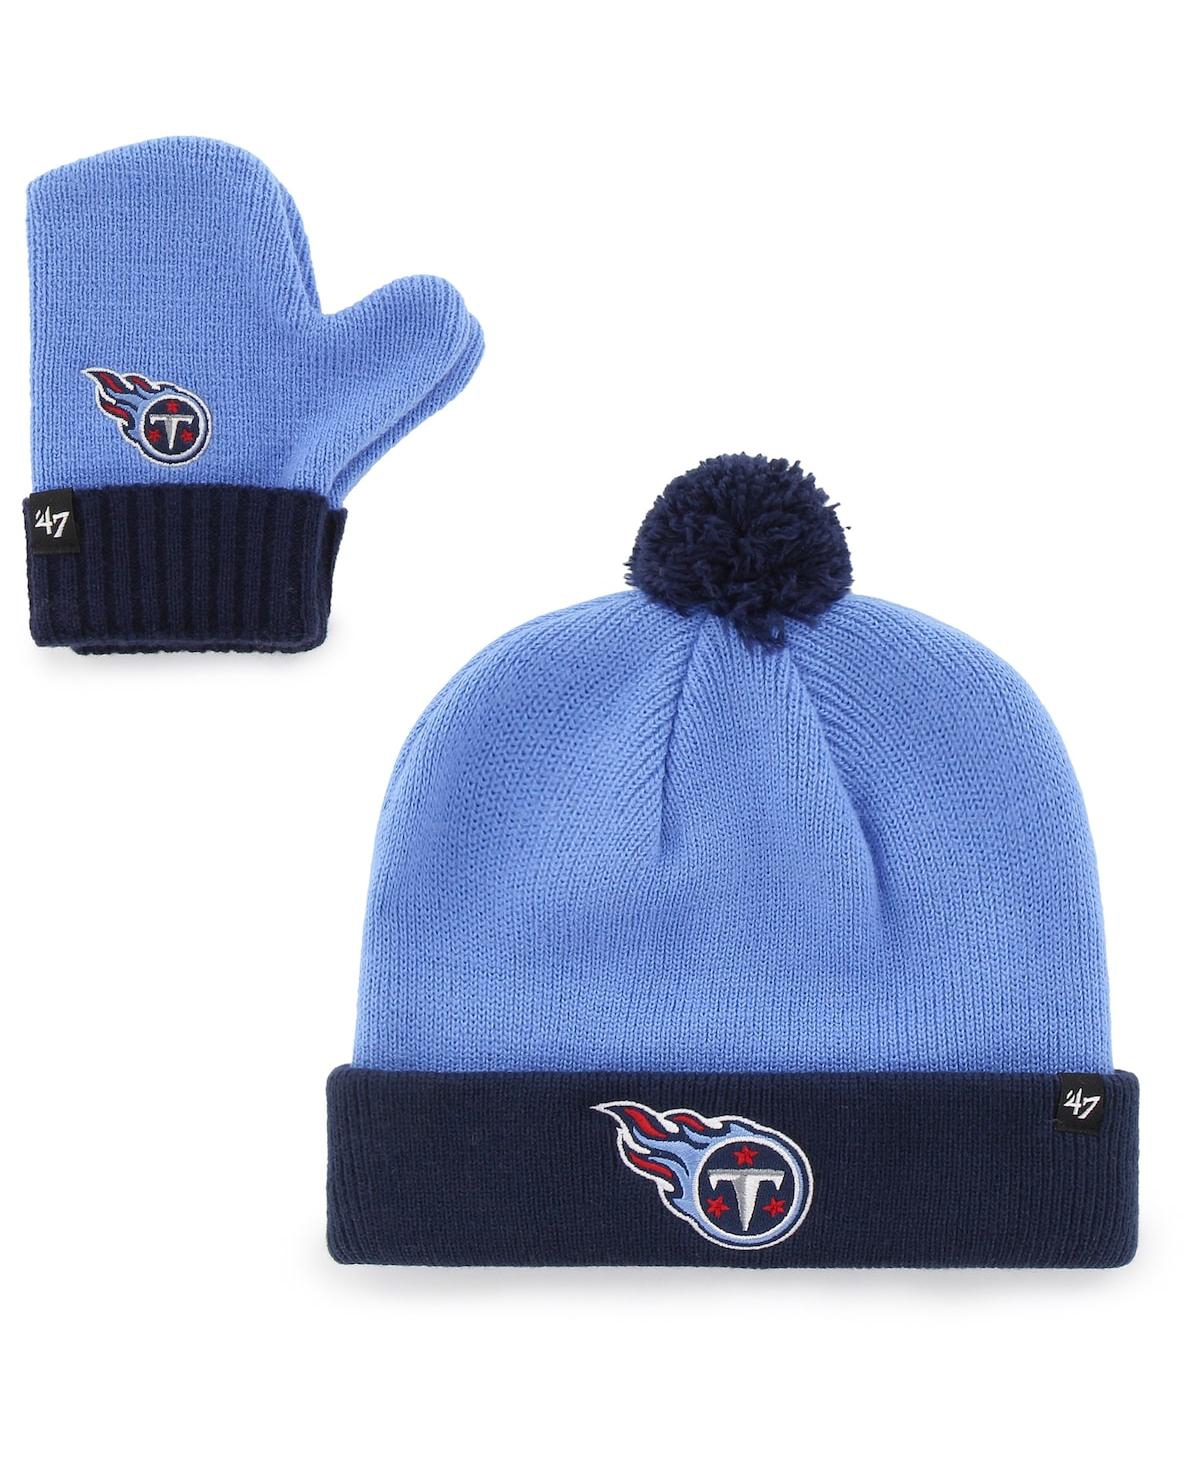 47 BRAND TODDLER UNISEX LIGHT BLUE AND NAVY TENNESSEE TITANS BAM BAM CUFFED KNIT HAT WITH POM AND MITTENS SET